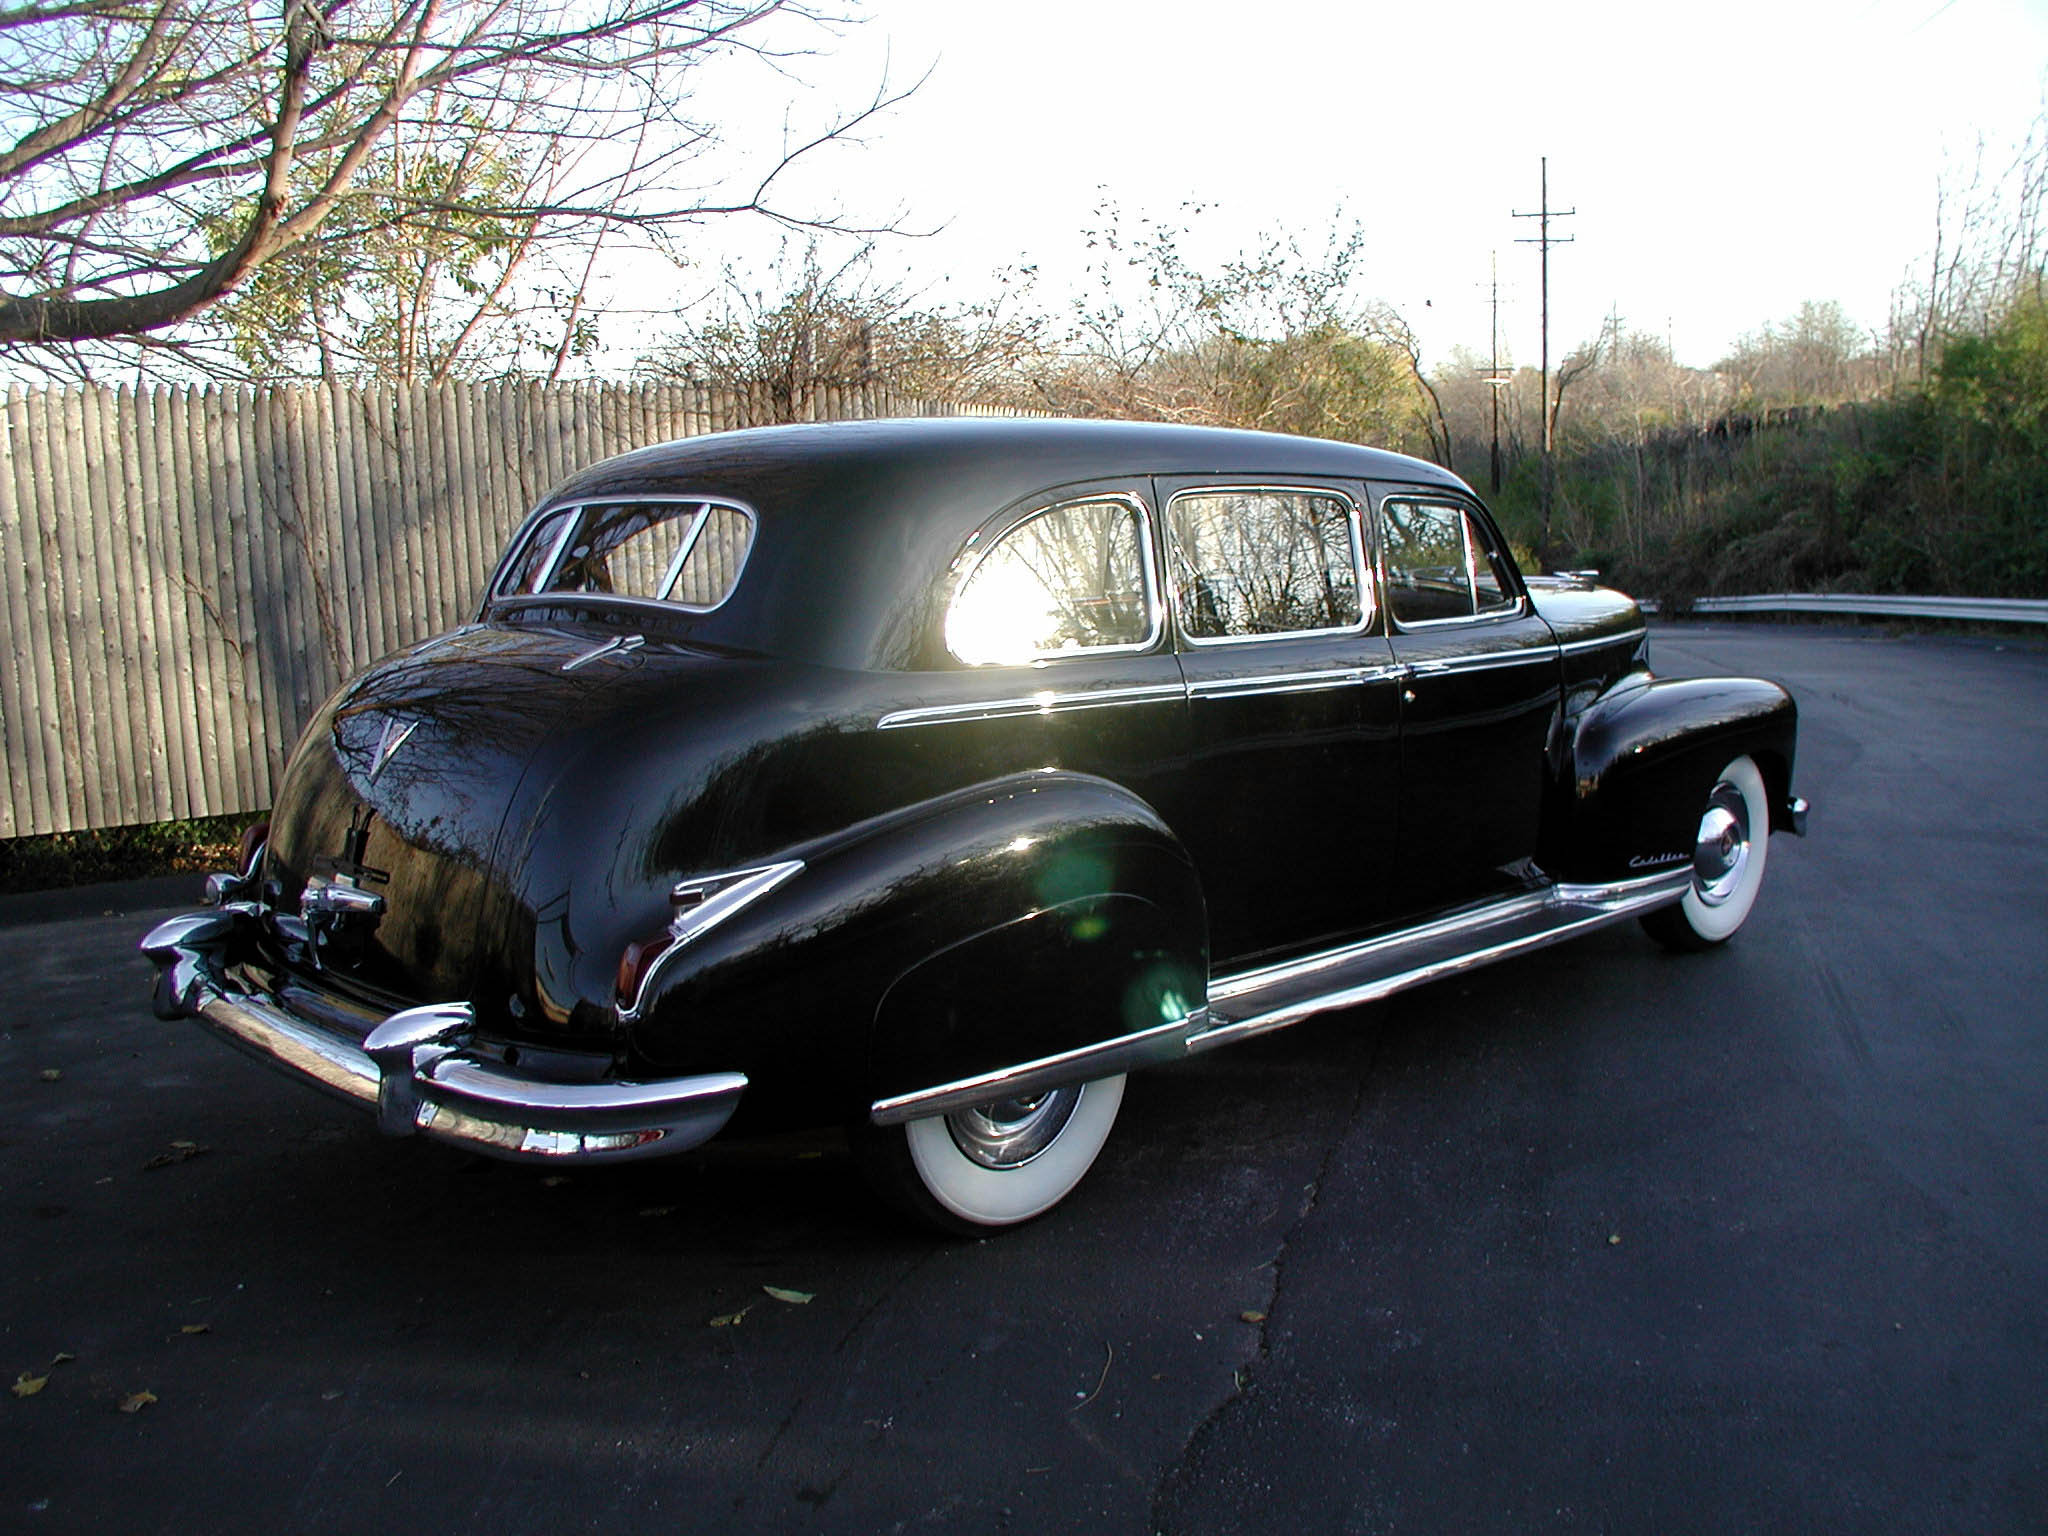 1947 cadillac fleetwood series 75 imperial